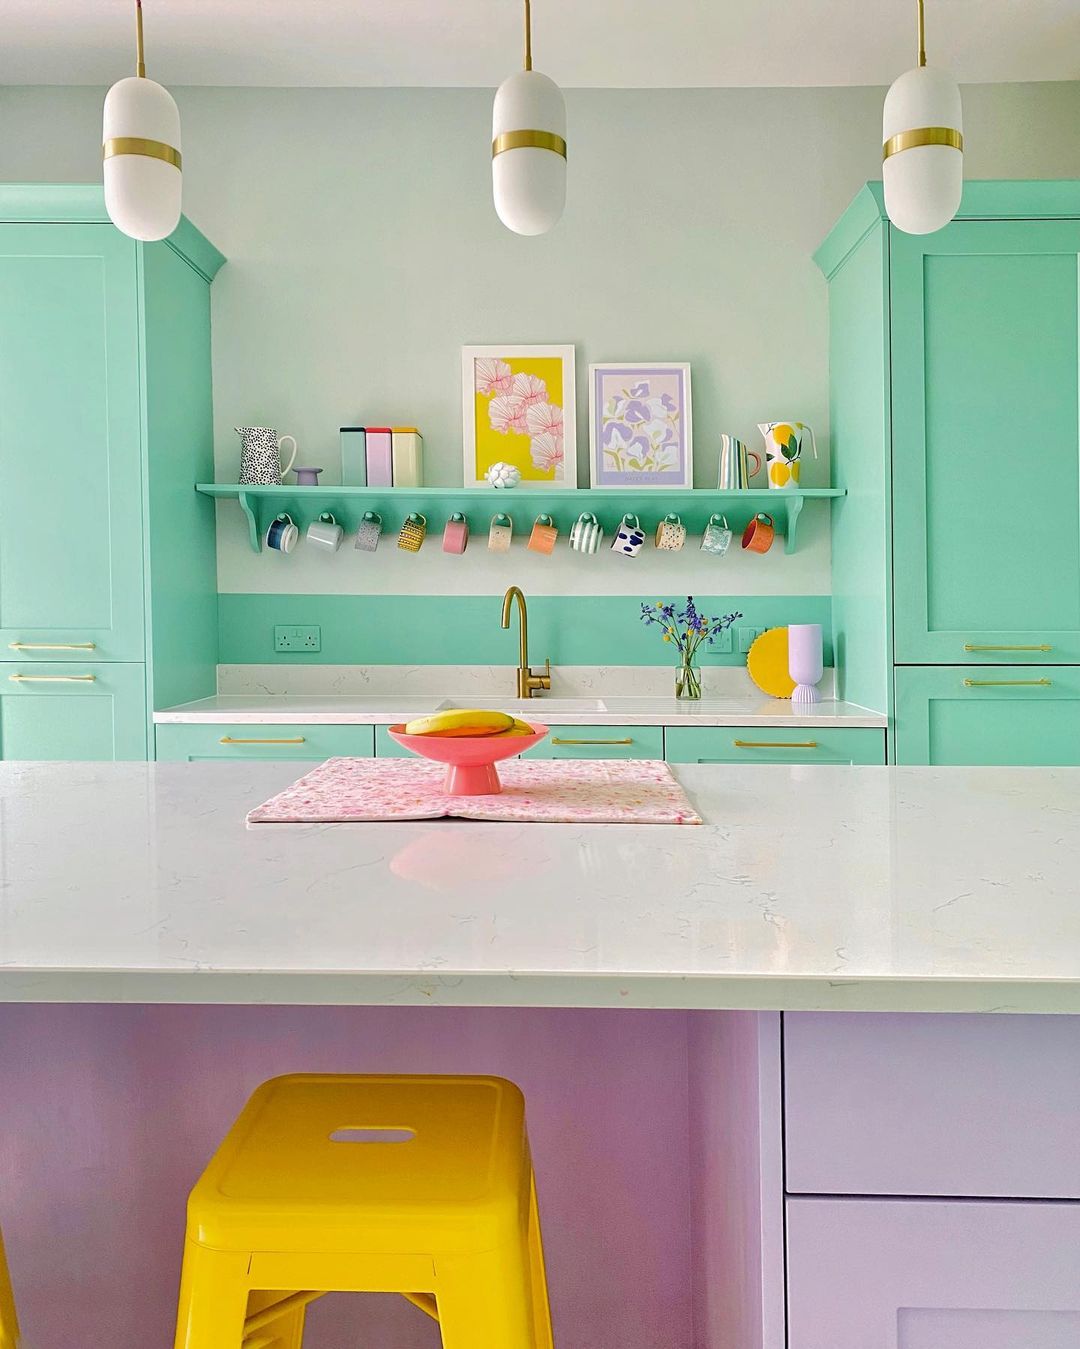 Brightly Painted Kitchen Cabinets and Island. Photo by Instagram user @paintthetownpastel